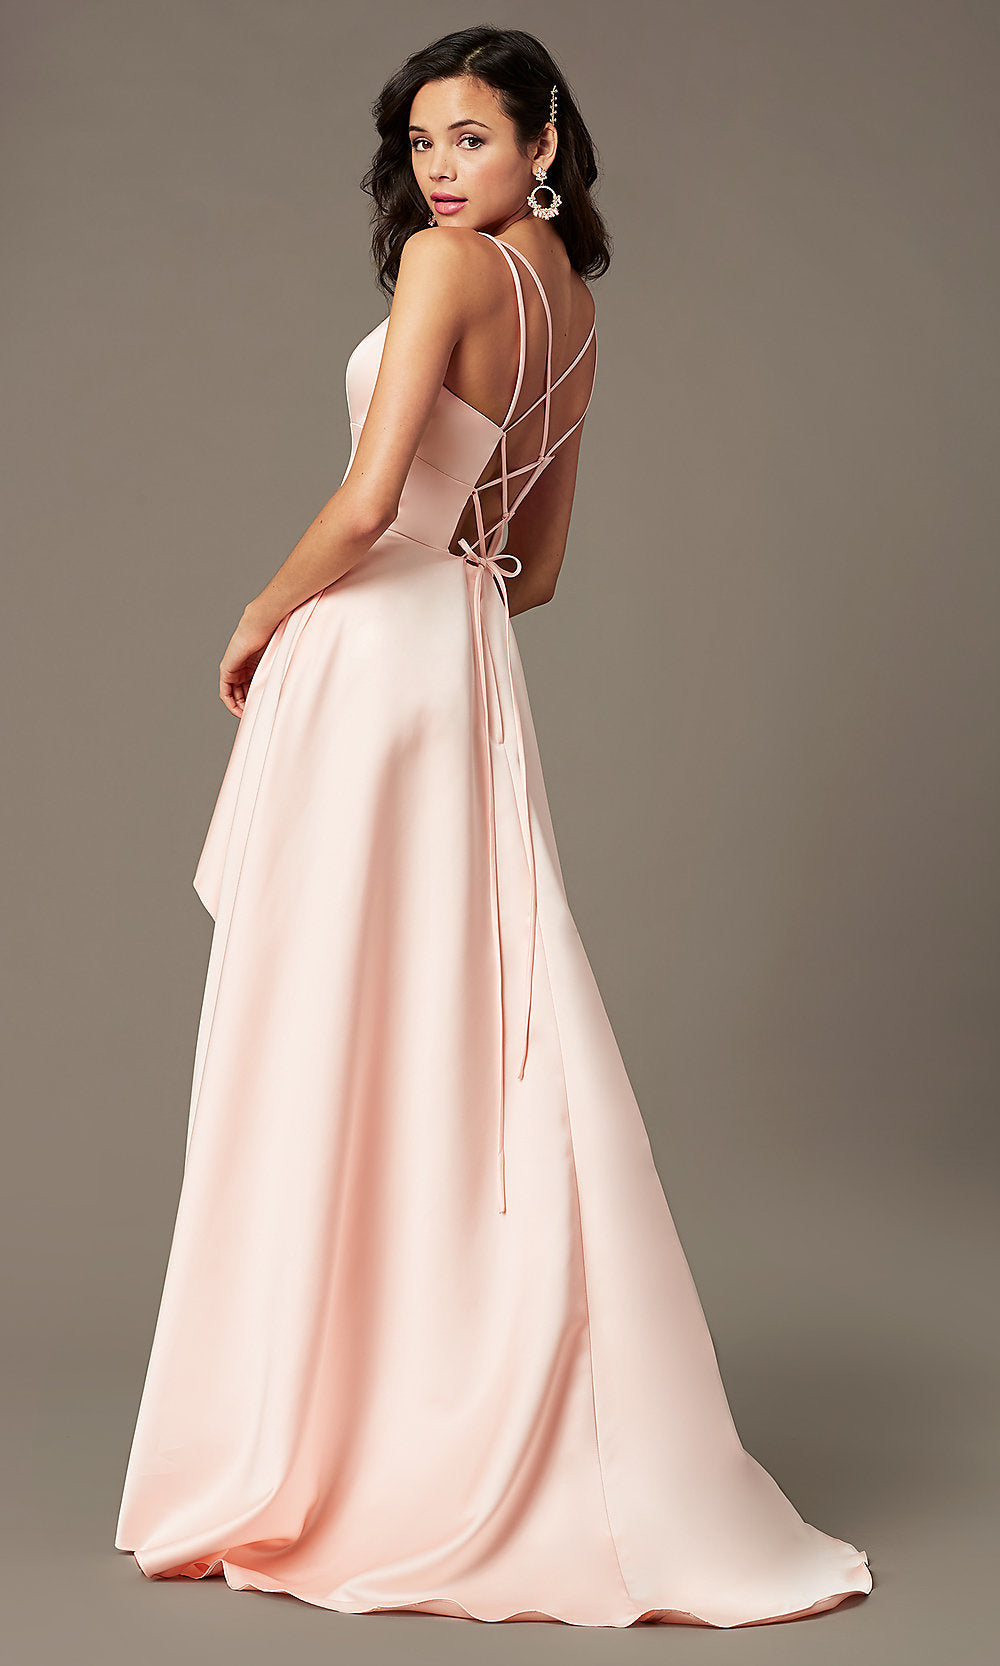  Corset-Back Satin High-Low Prom Dress by PromGirl